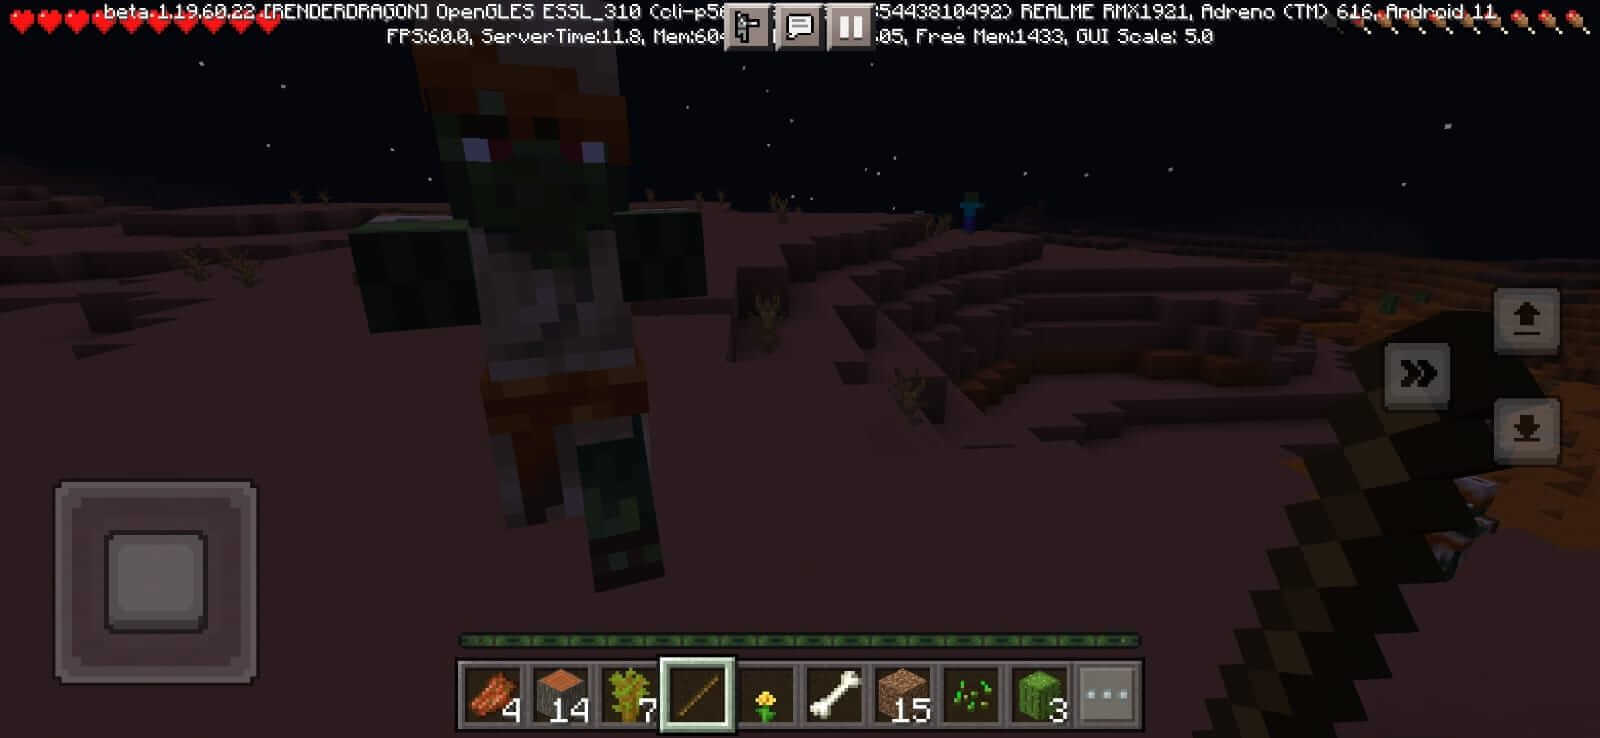 Minecraft Java Edition APK v1.20.50.24 Download For Android